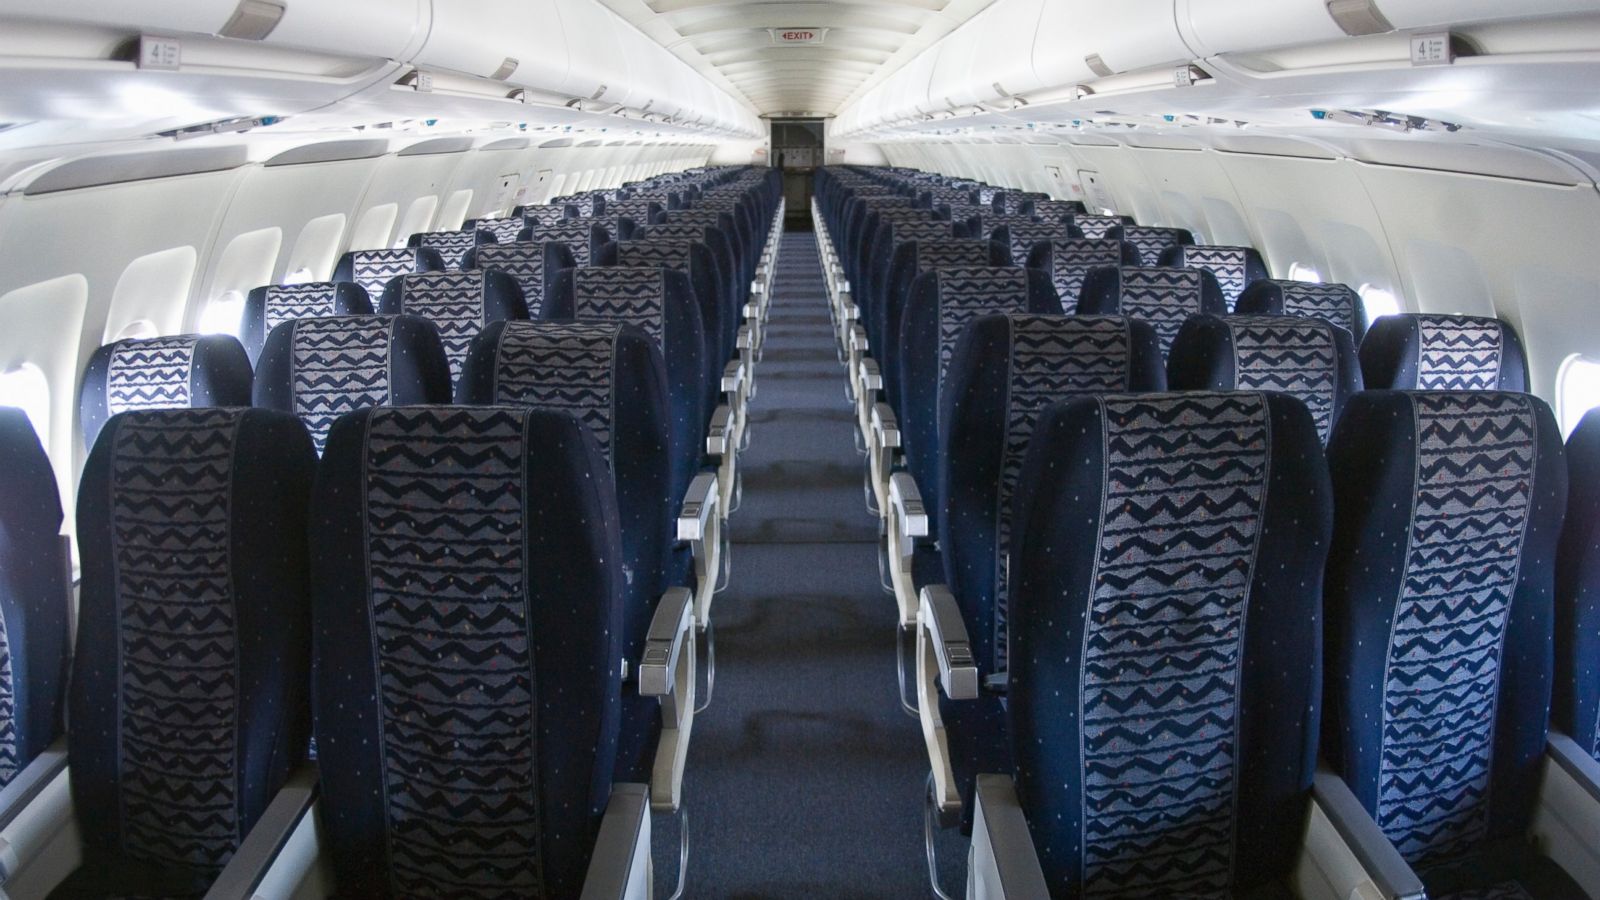 Congress Considers Weighing in on Airline Seat Sizes - ABC News